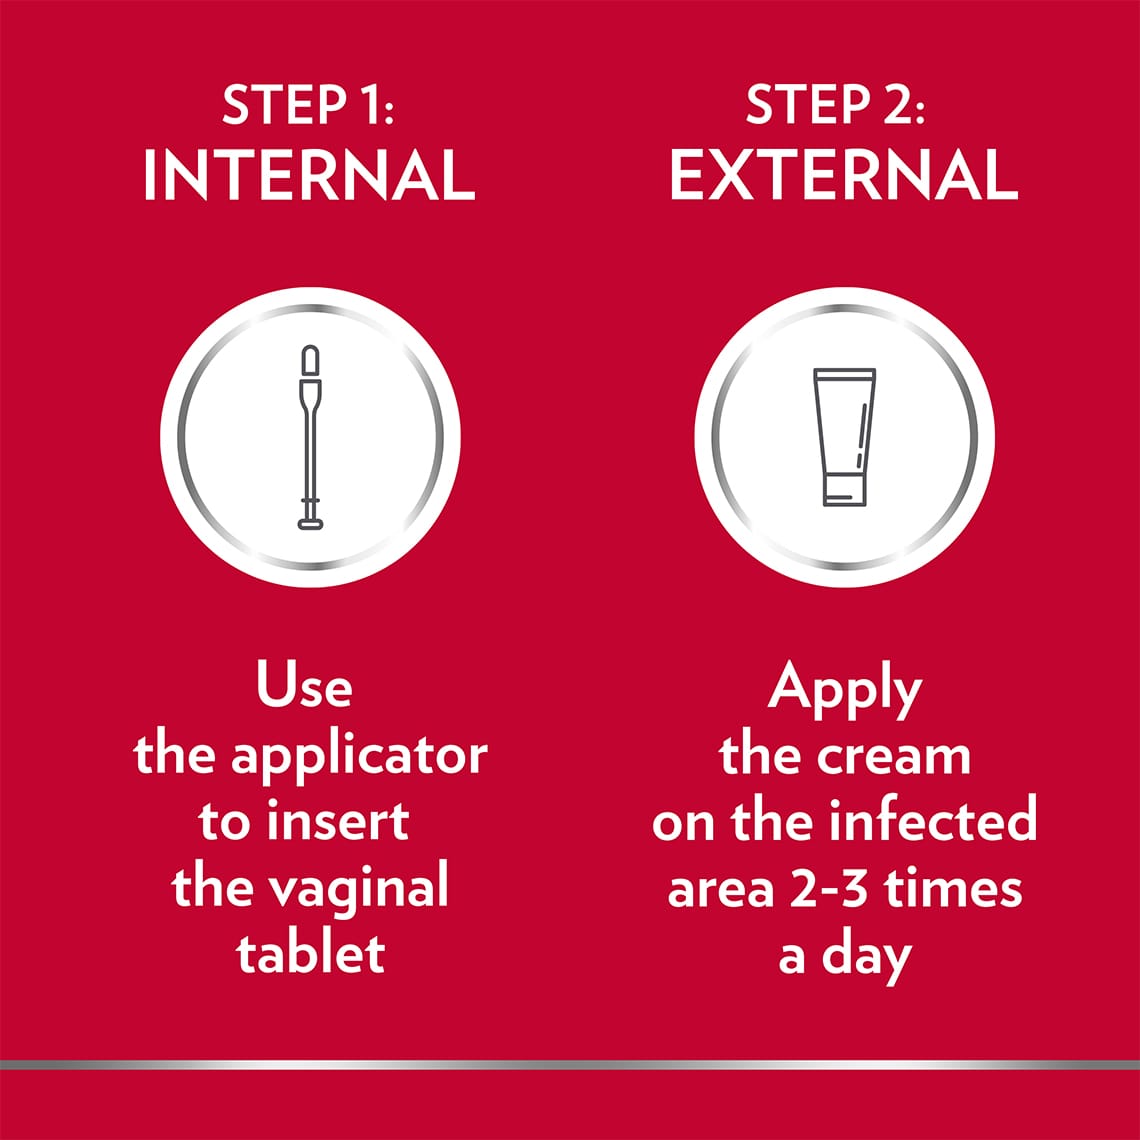 Canesten Thrush Combi Vaginal Tablet & External Cream instructions: Step 1: Internal, use the applicator to insert the tablet; Step 2: External, apply the cream on the affected area 2-3 times a day